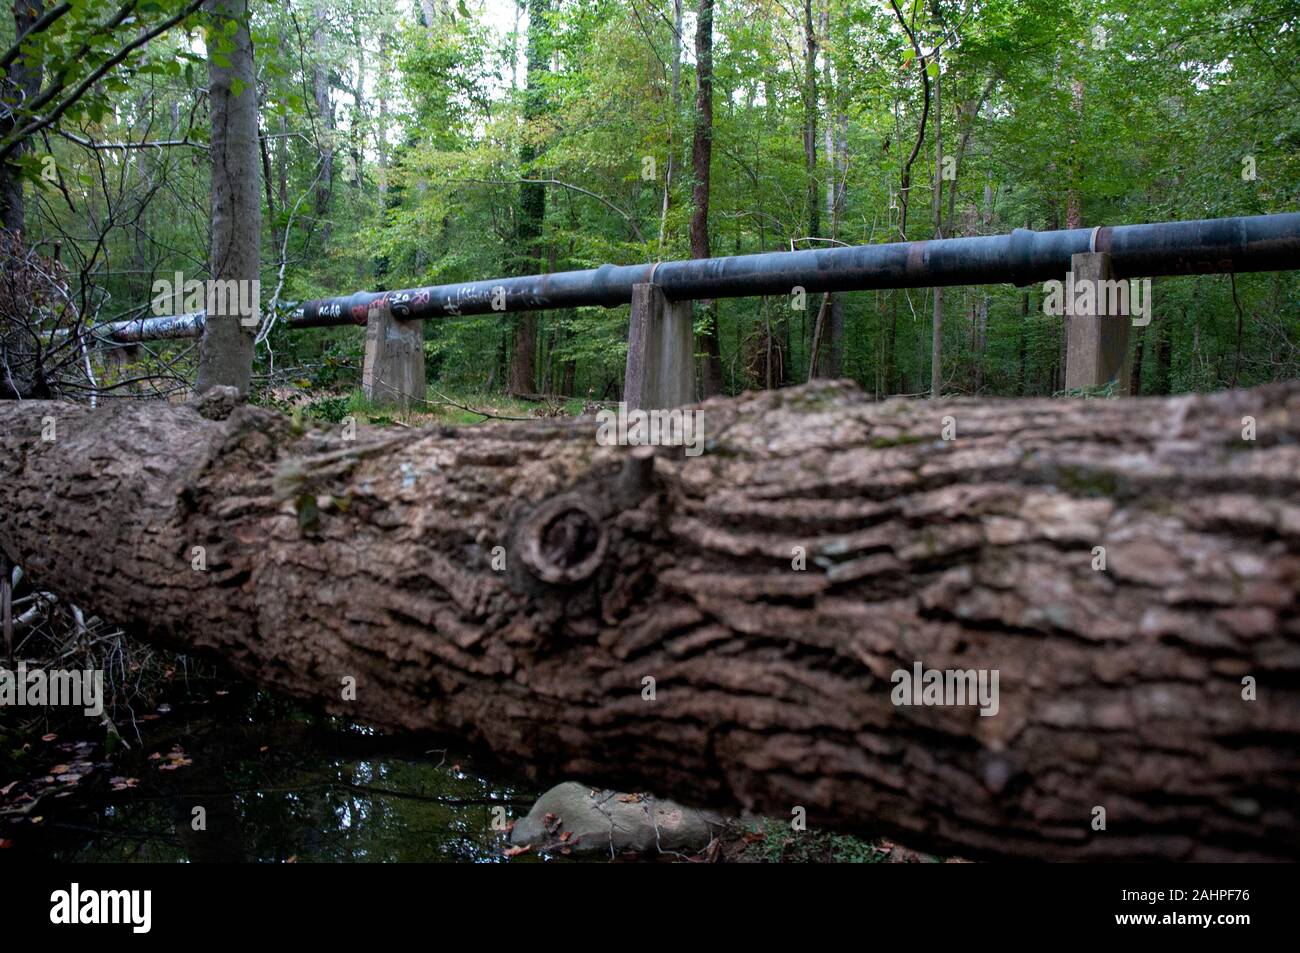 Fallen Tree and Graffiti Pipe Leading Lines, Sewage Pollution Stock Photo